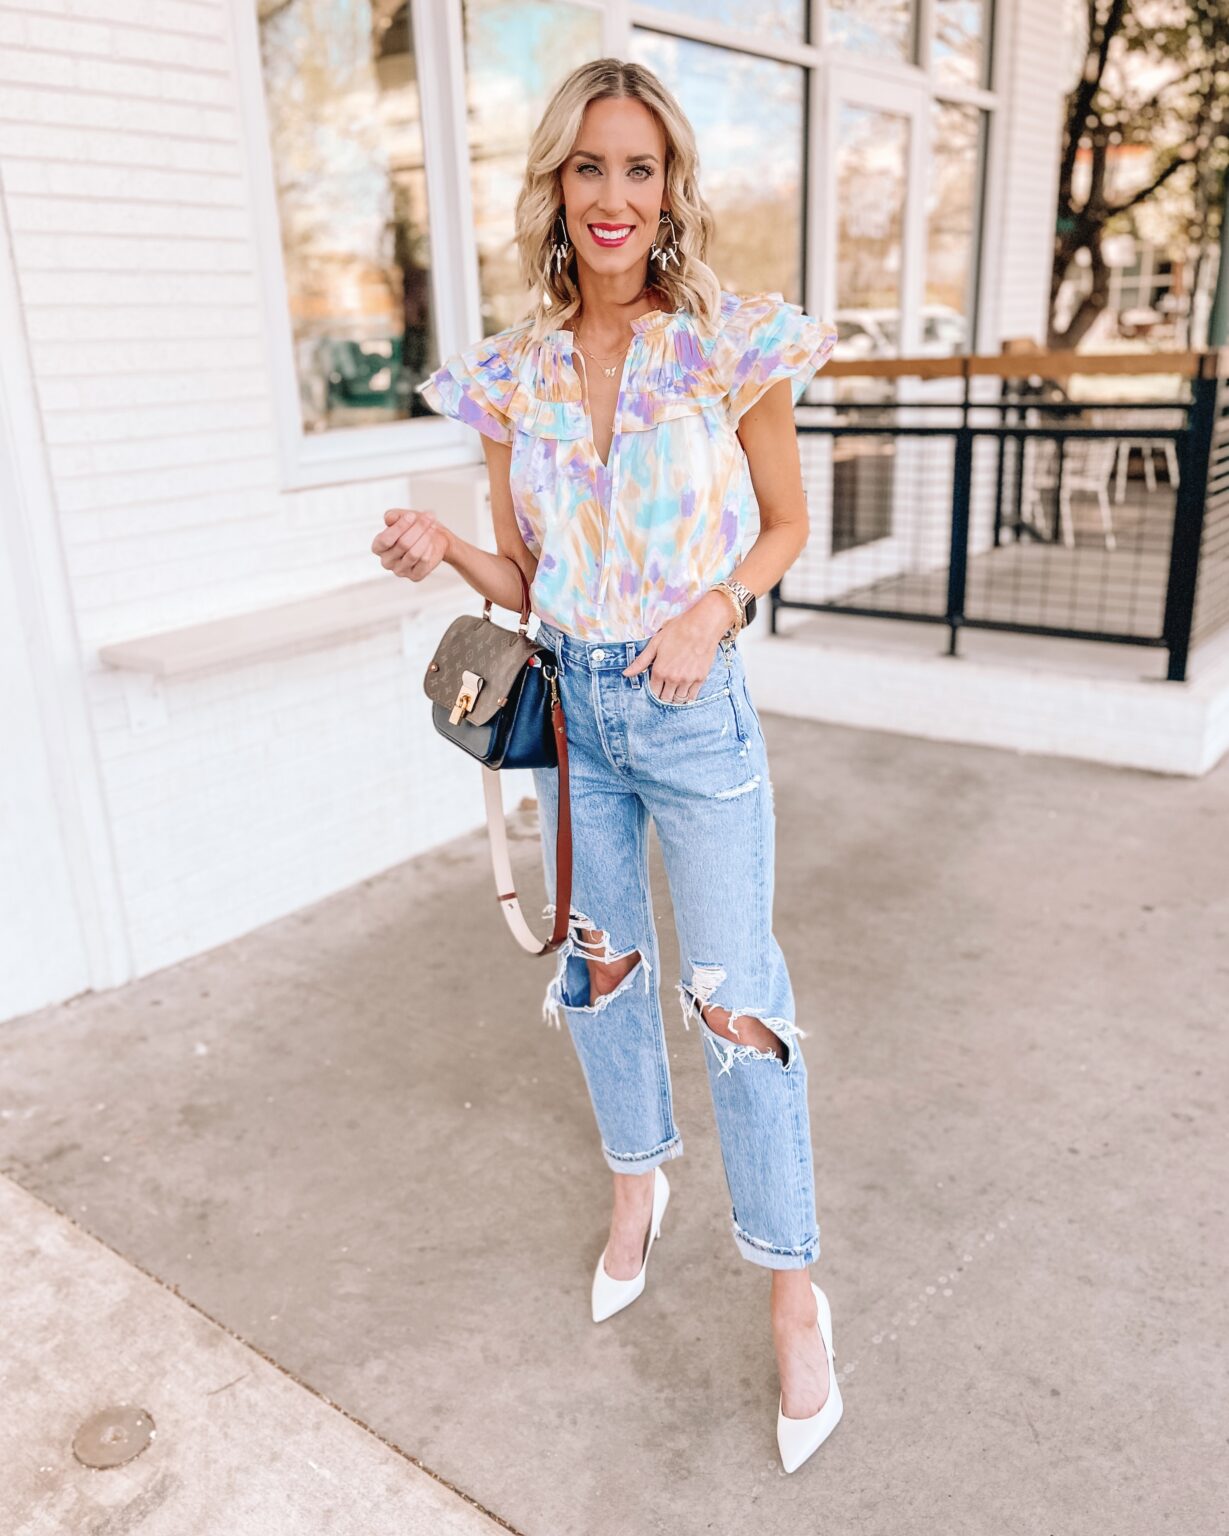 1 Spring Blouse 4 Ways - Straight A Style